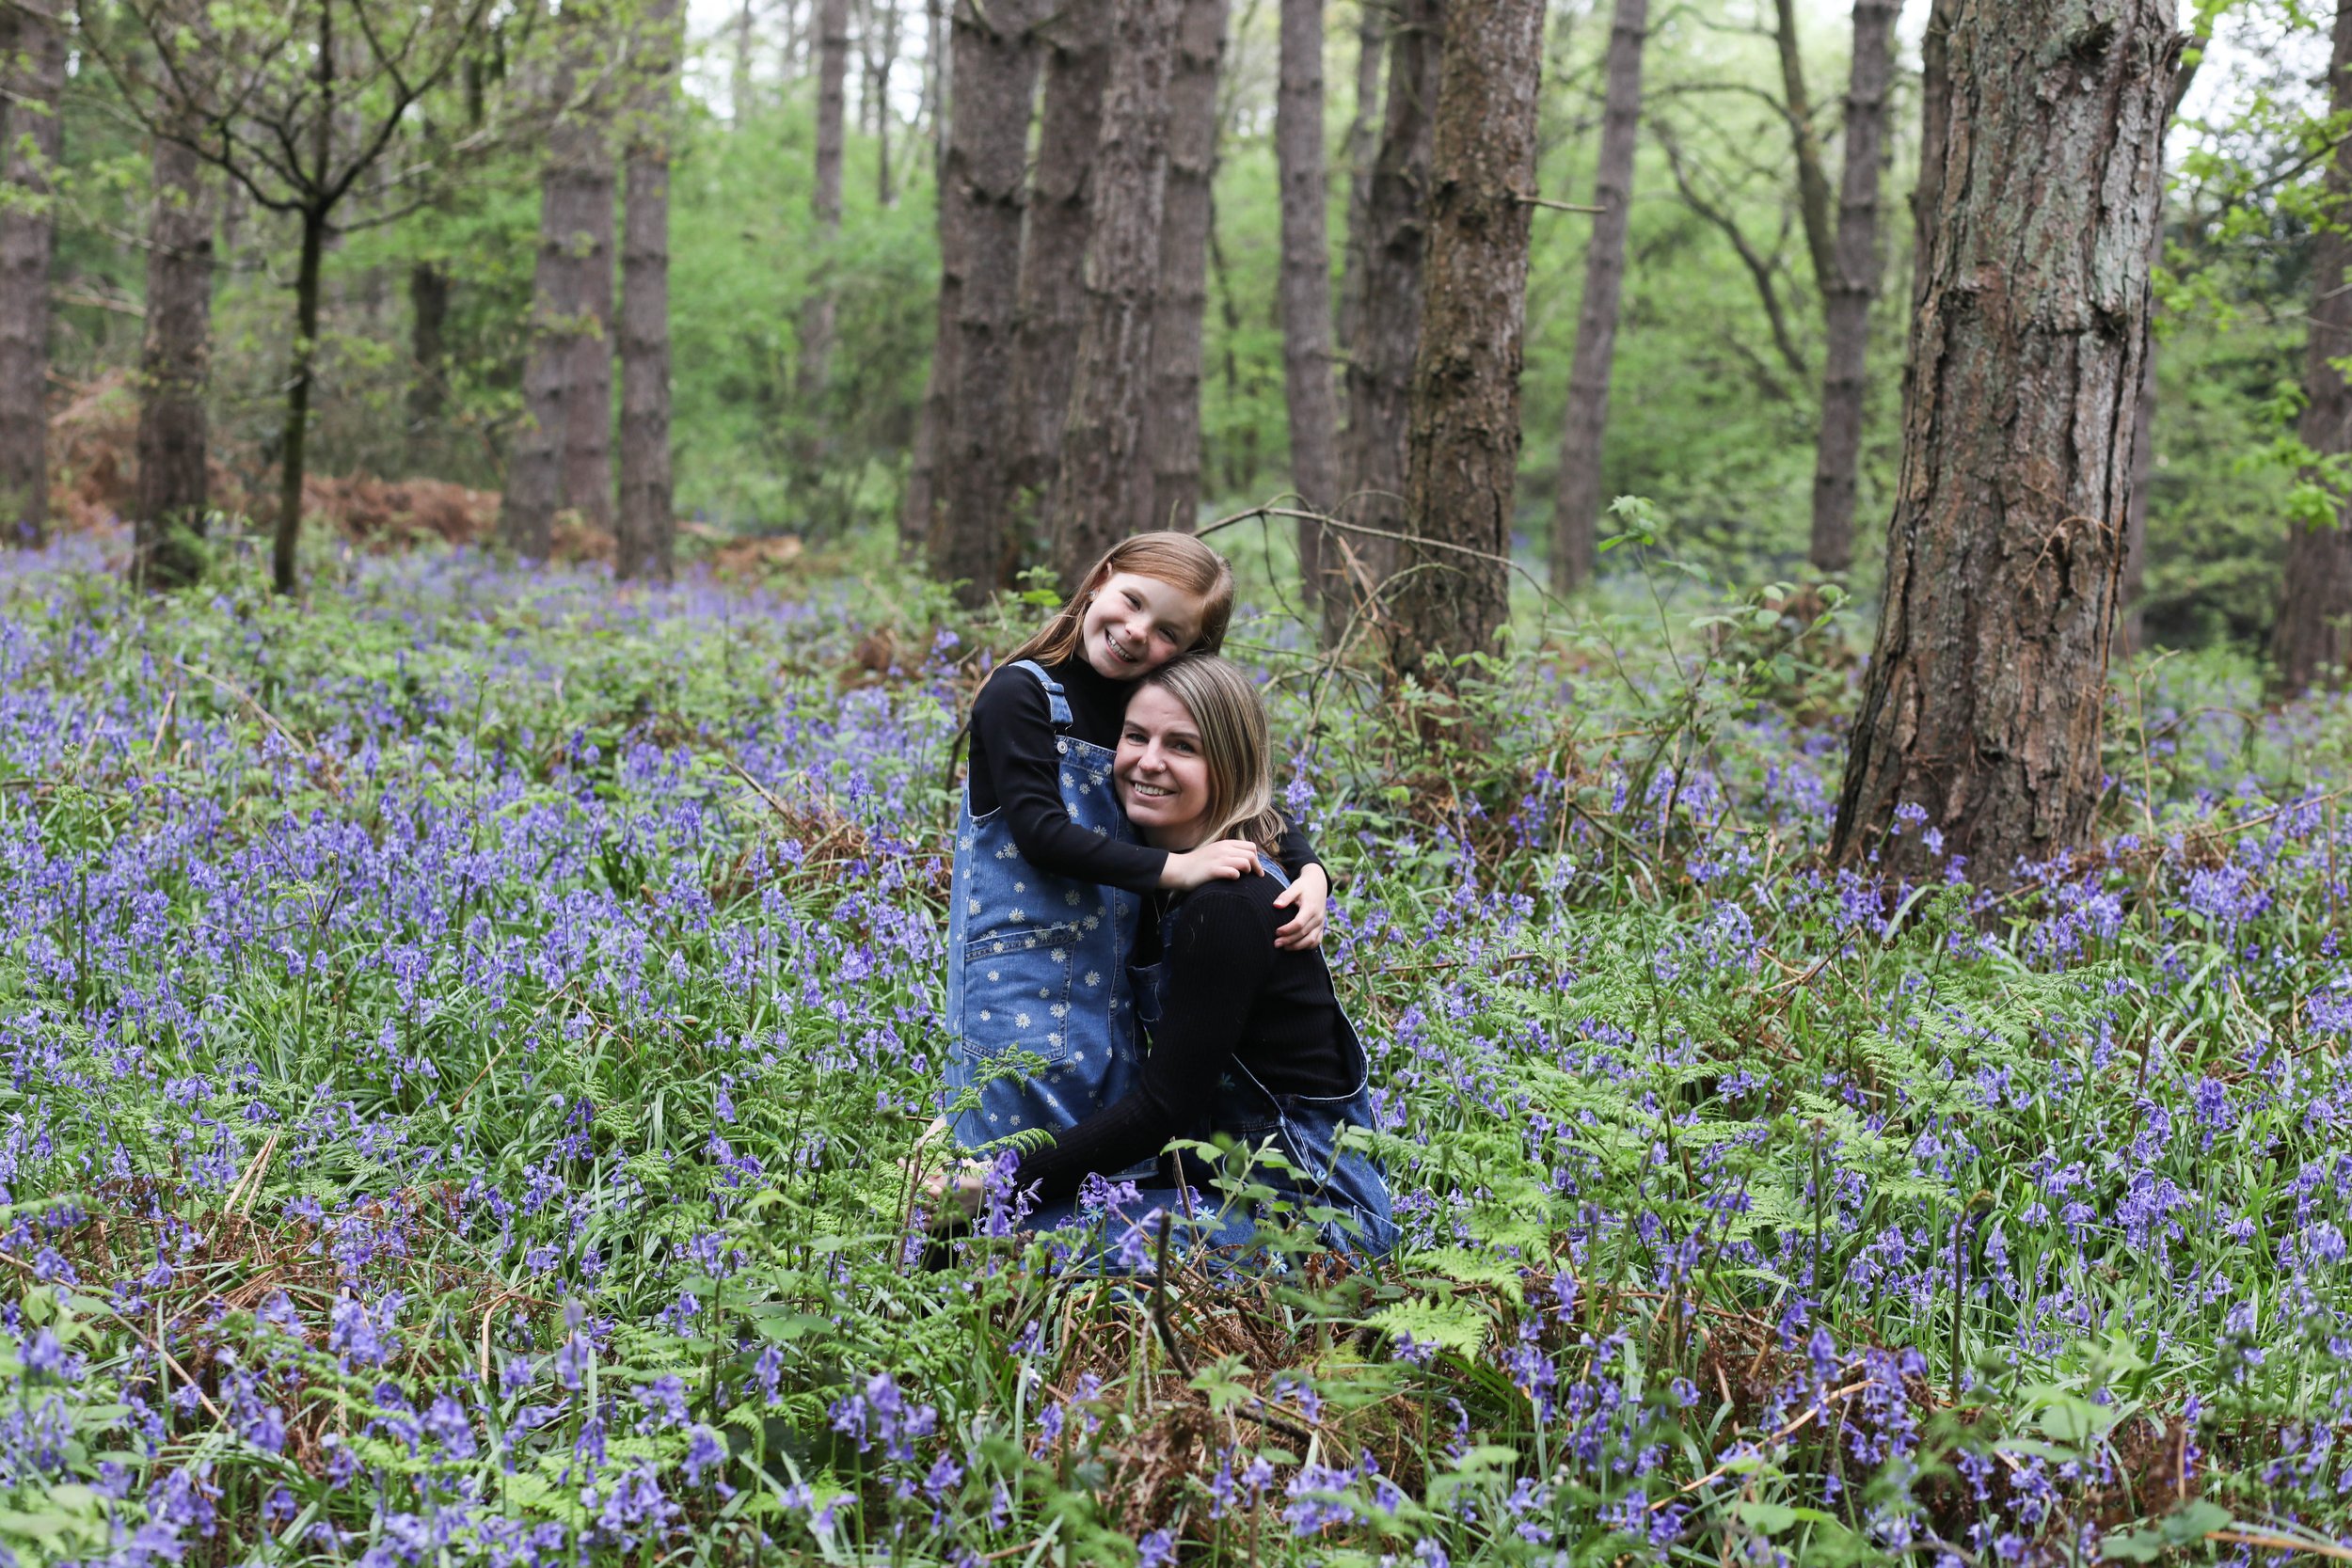 MUM AND DAUGHTER PHOTO SHOOT IN THE BLUEBELLS | BERKSHIRE PORTRAIT SHOOTS35 choice .JPG